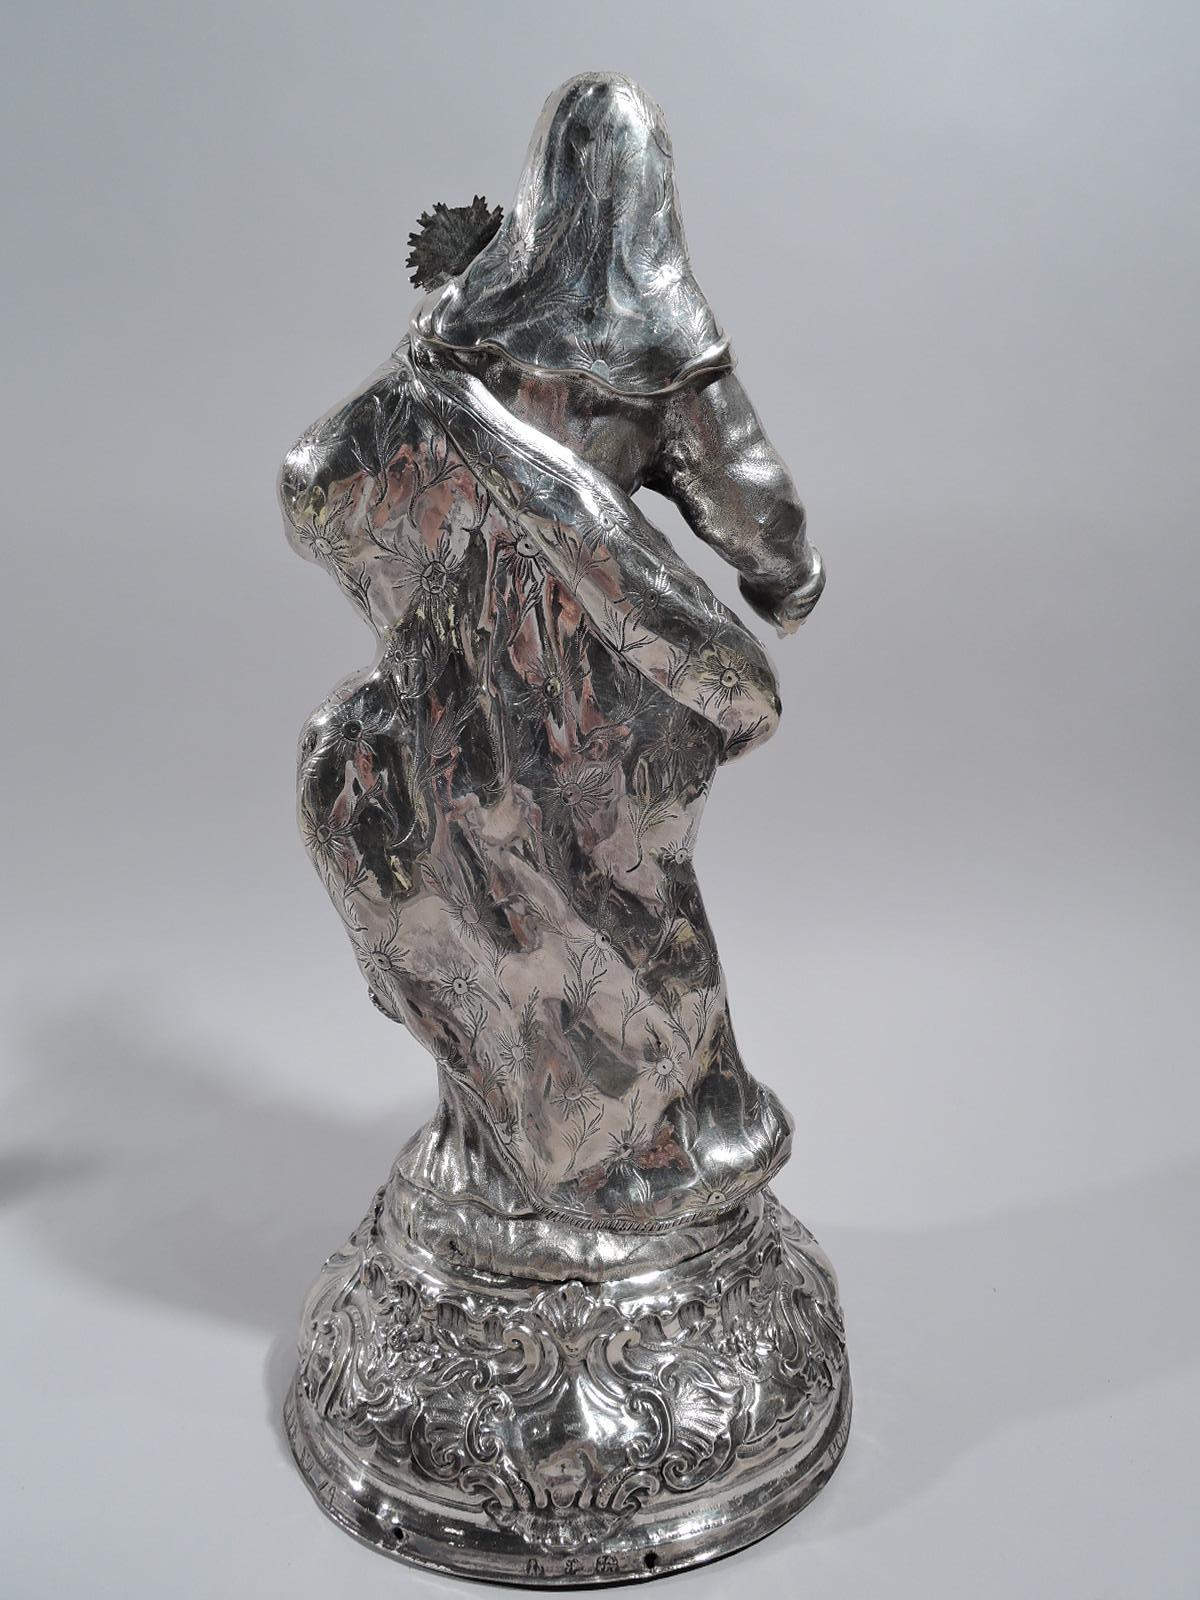 Rococo Antique Spanish Silver Figure of Virgin Mary and Child, 18th Century